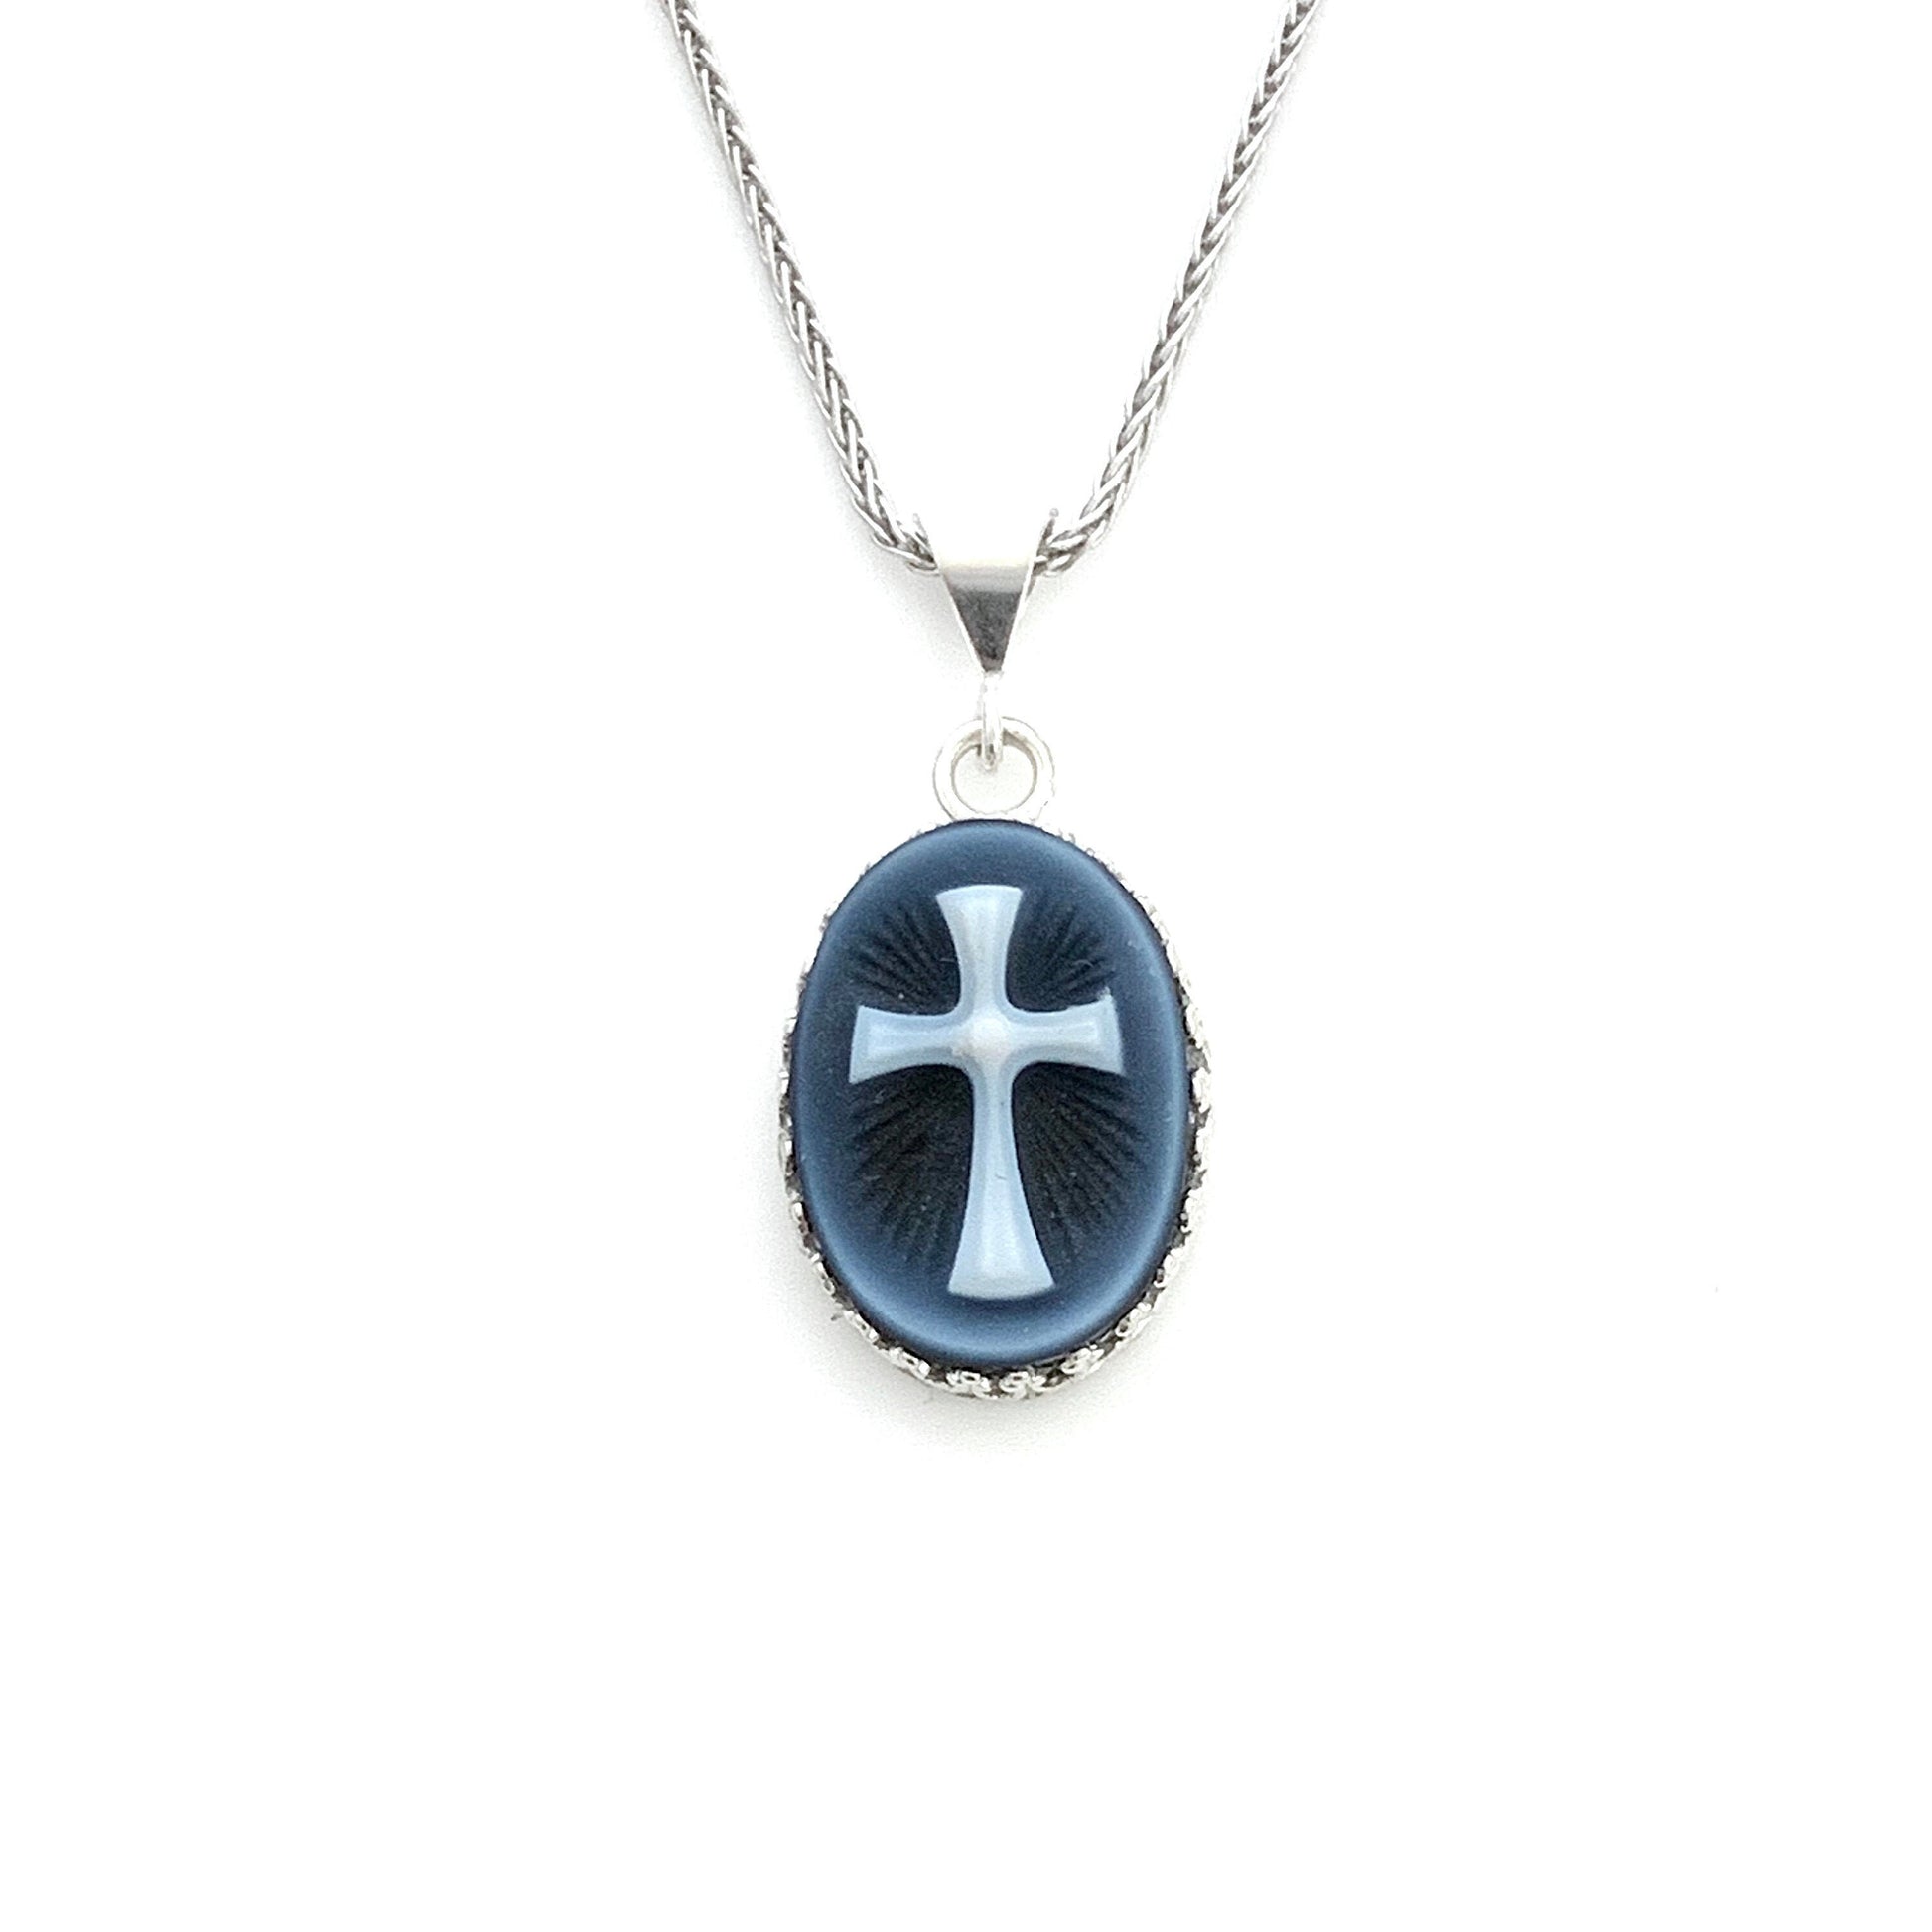 Dainty Cross Cameo Necklace, Christian Jewelry, Religious Jewelry, Unique Gifts for Women